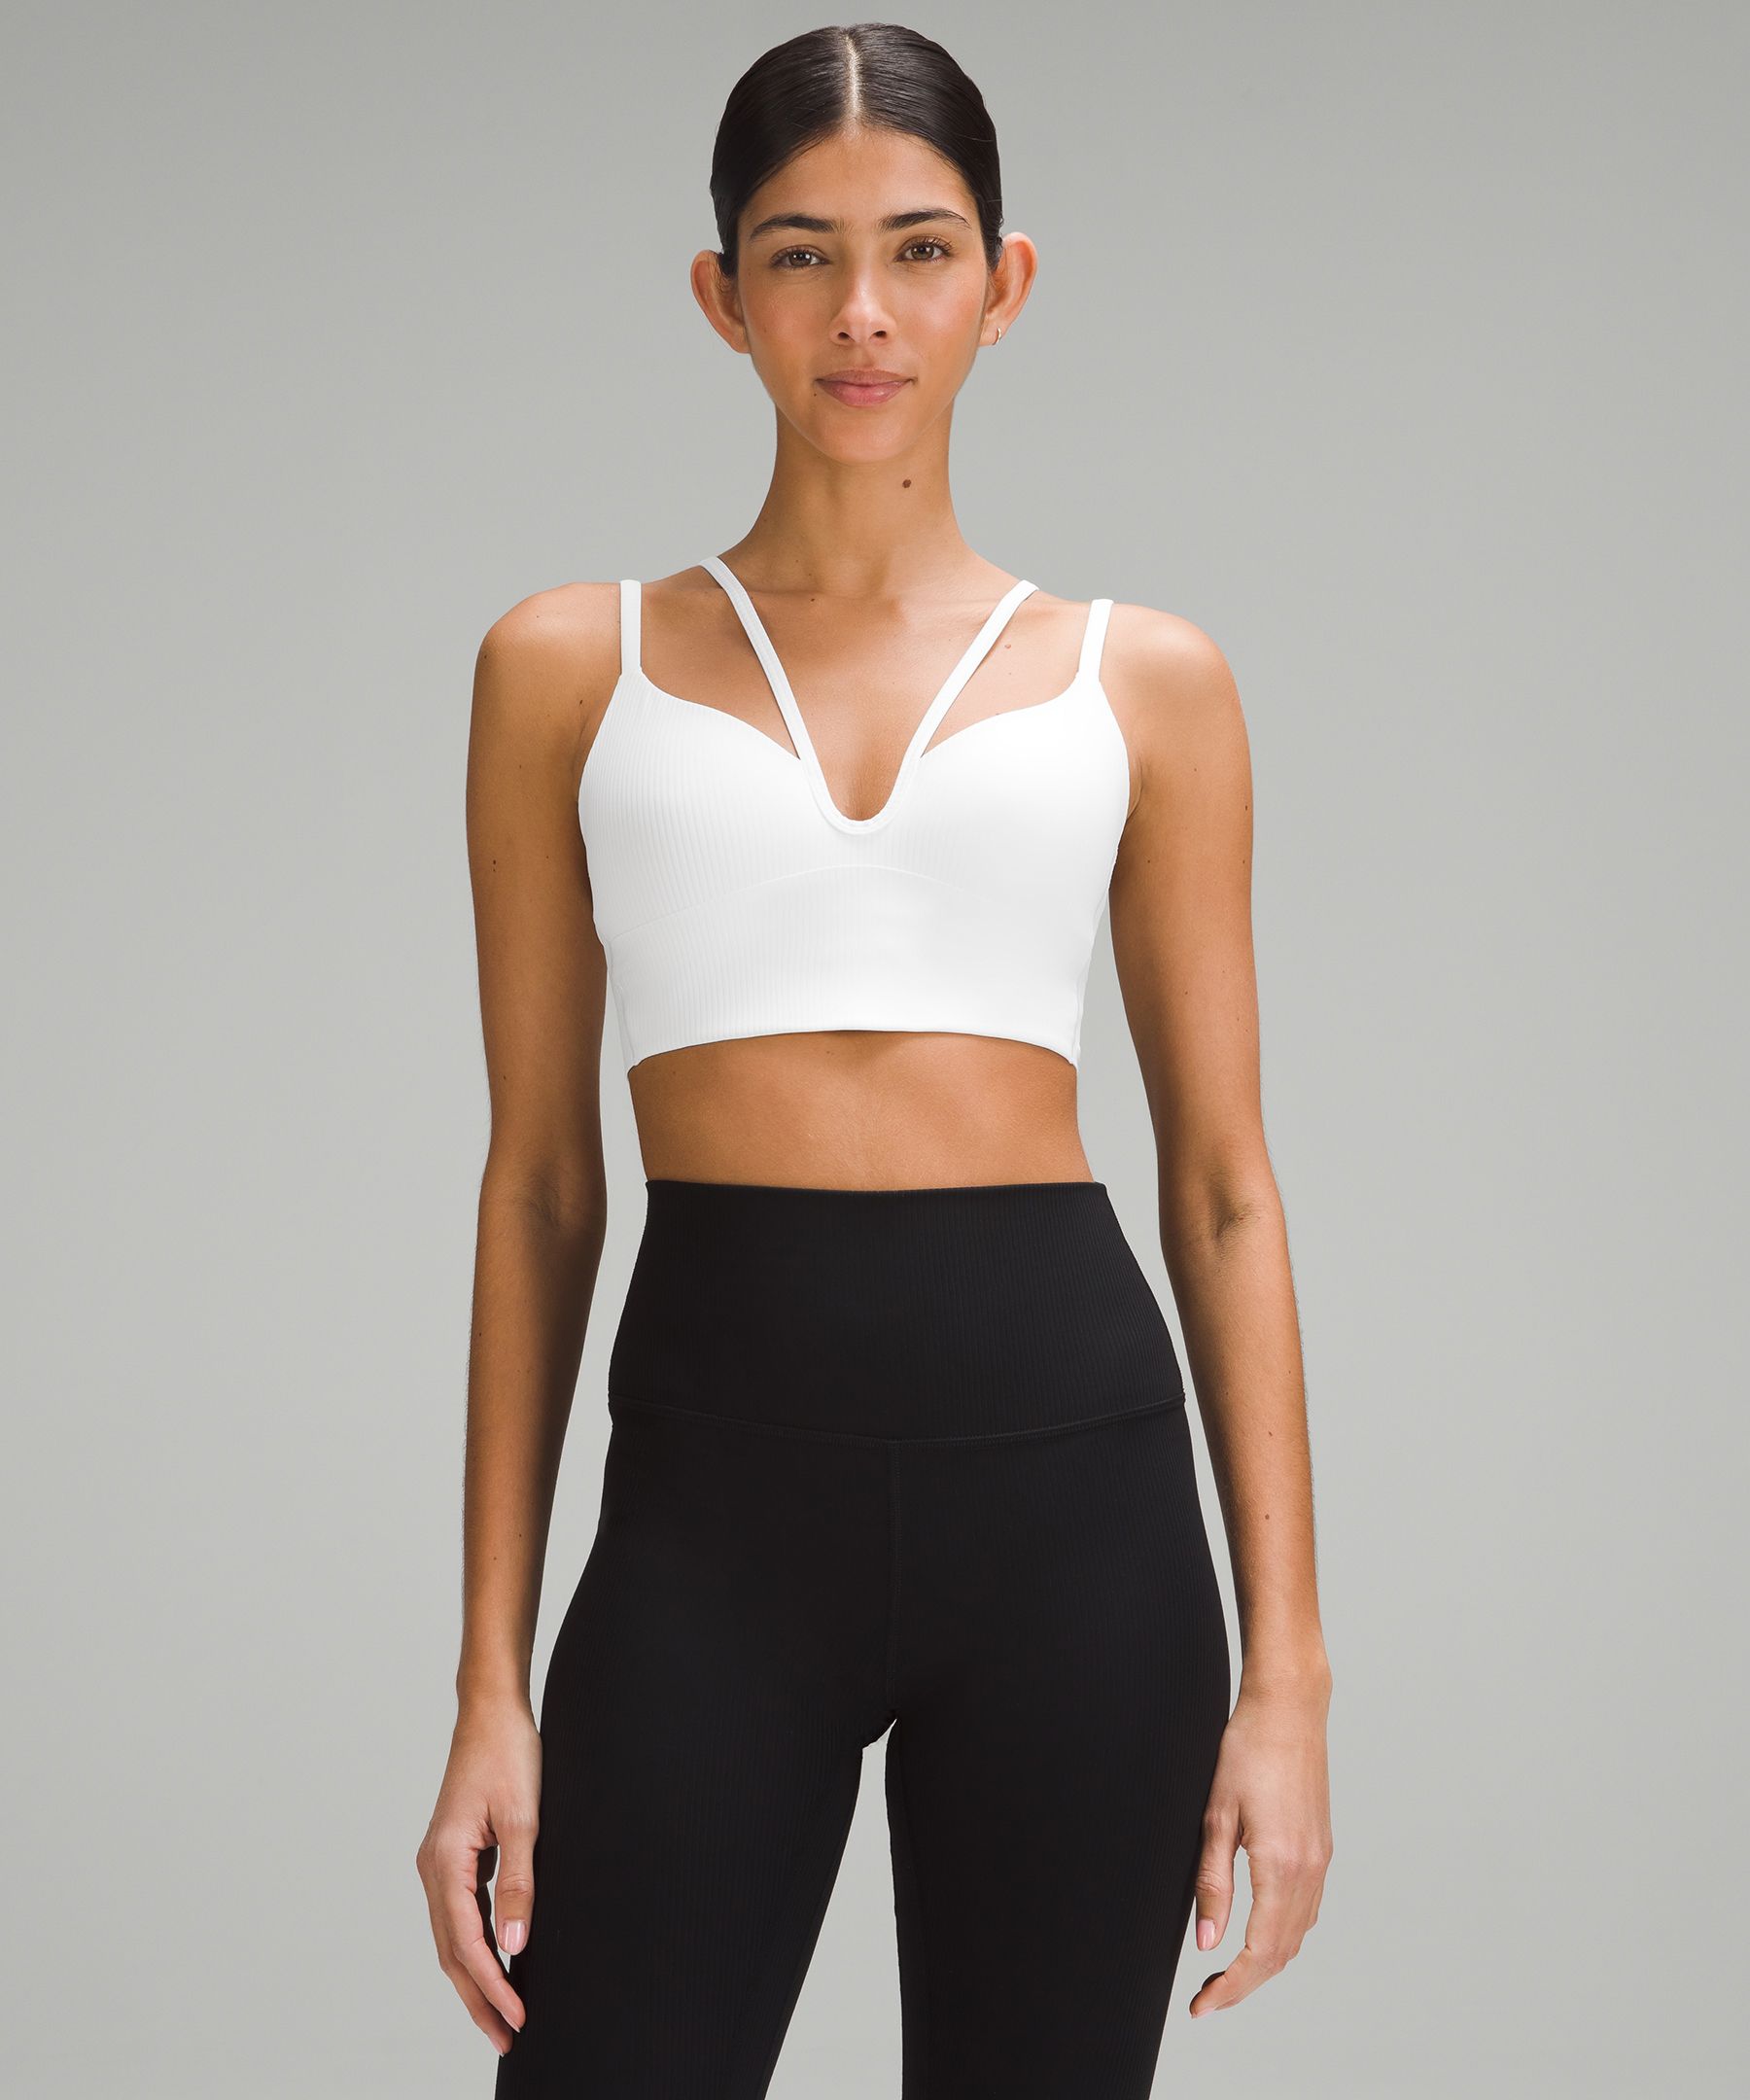 Lululemon Like A Cloud Strappy Longline Ribbed Bra Light Support, B/c Cup